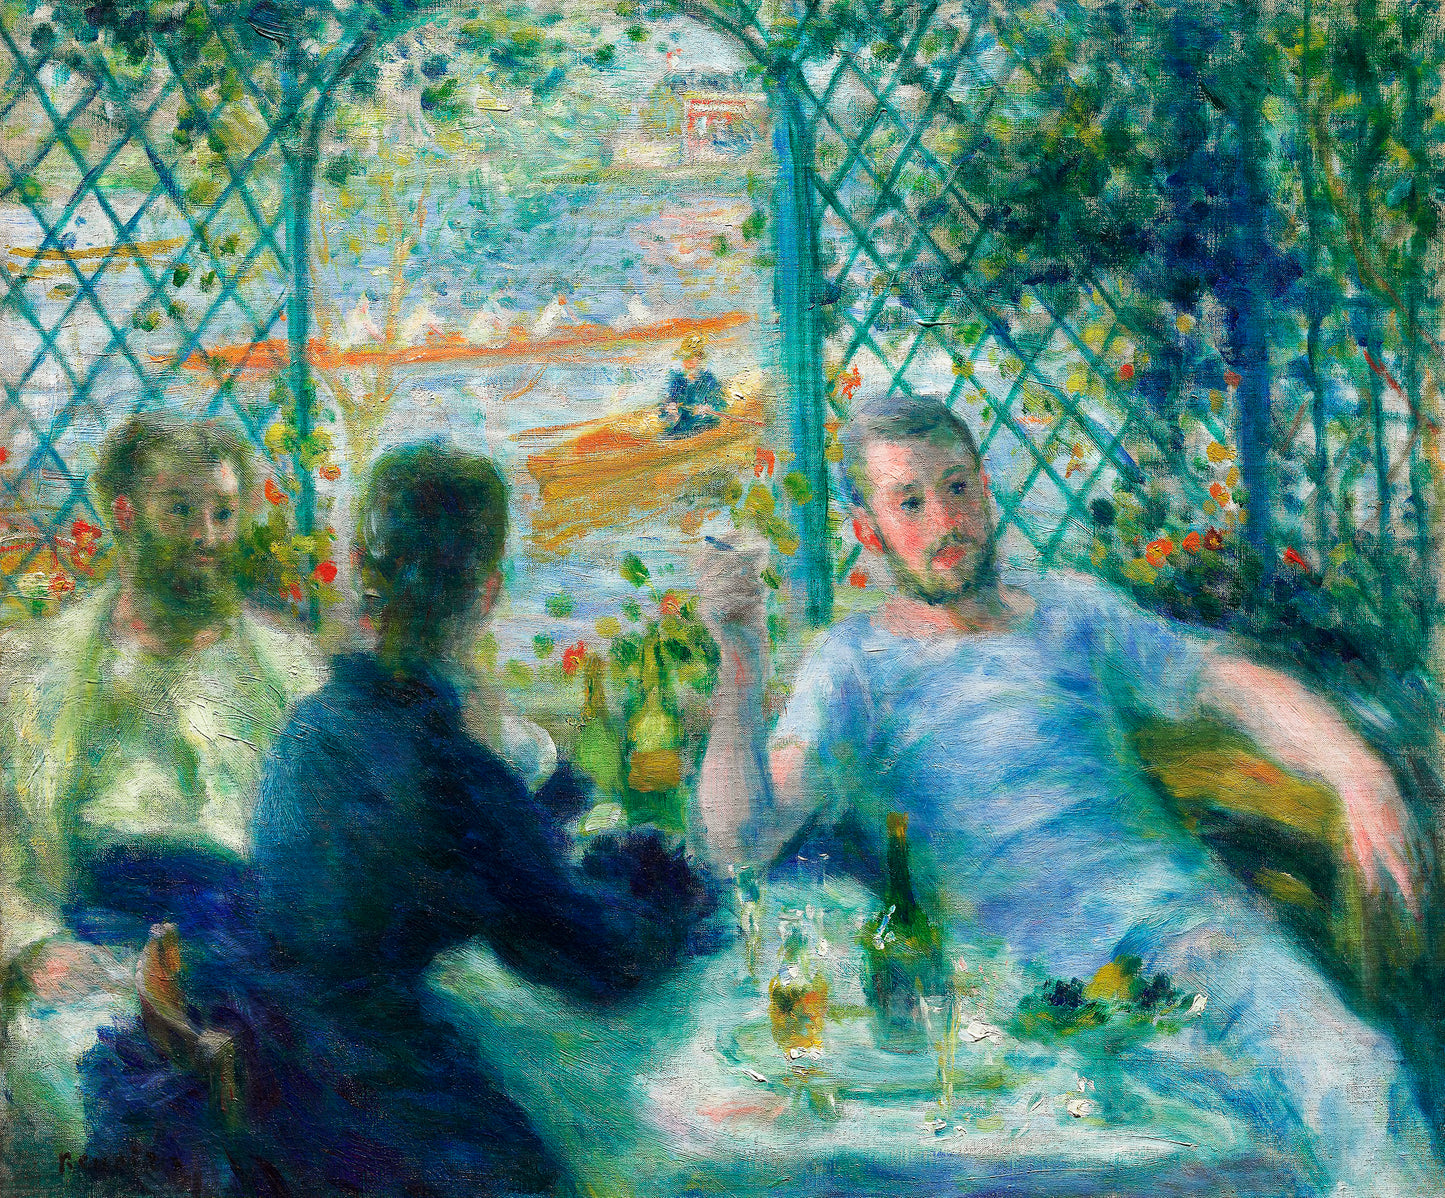 Pierre-Auguste Renoir - Lunch at the Restaurant Fournaise - The Rowers’ Lunch 1875 - Digital Art - JPG File Download